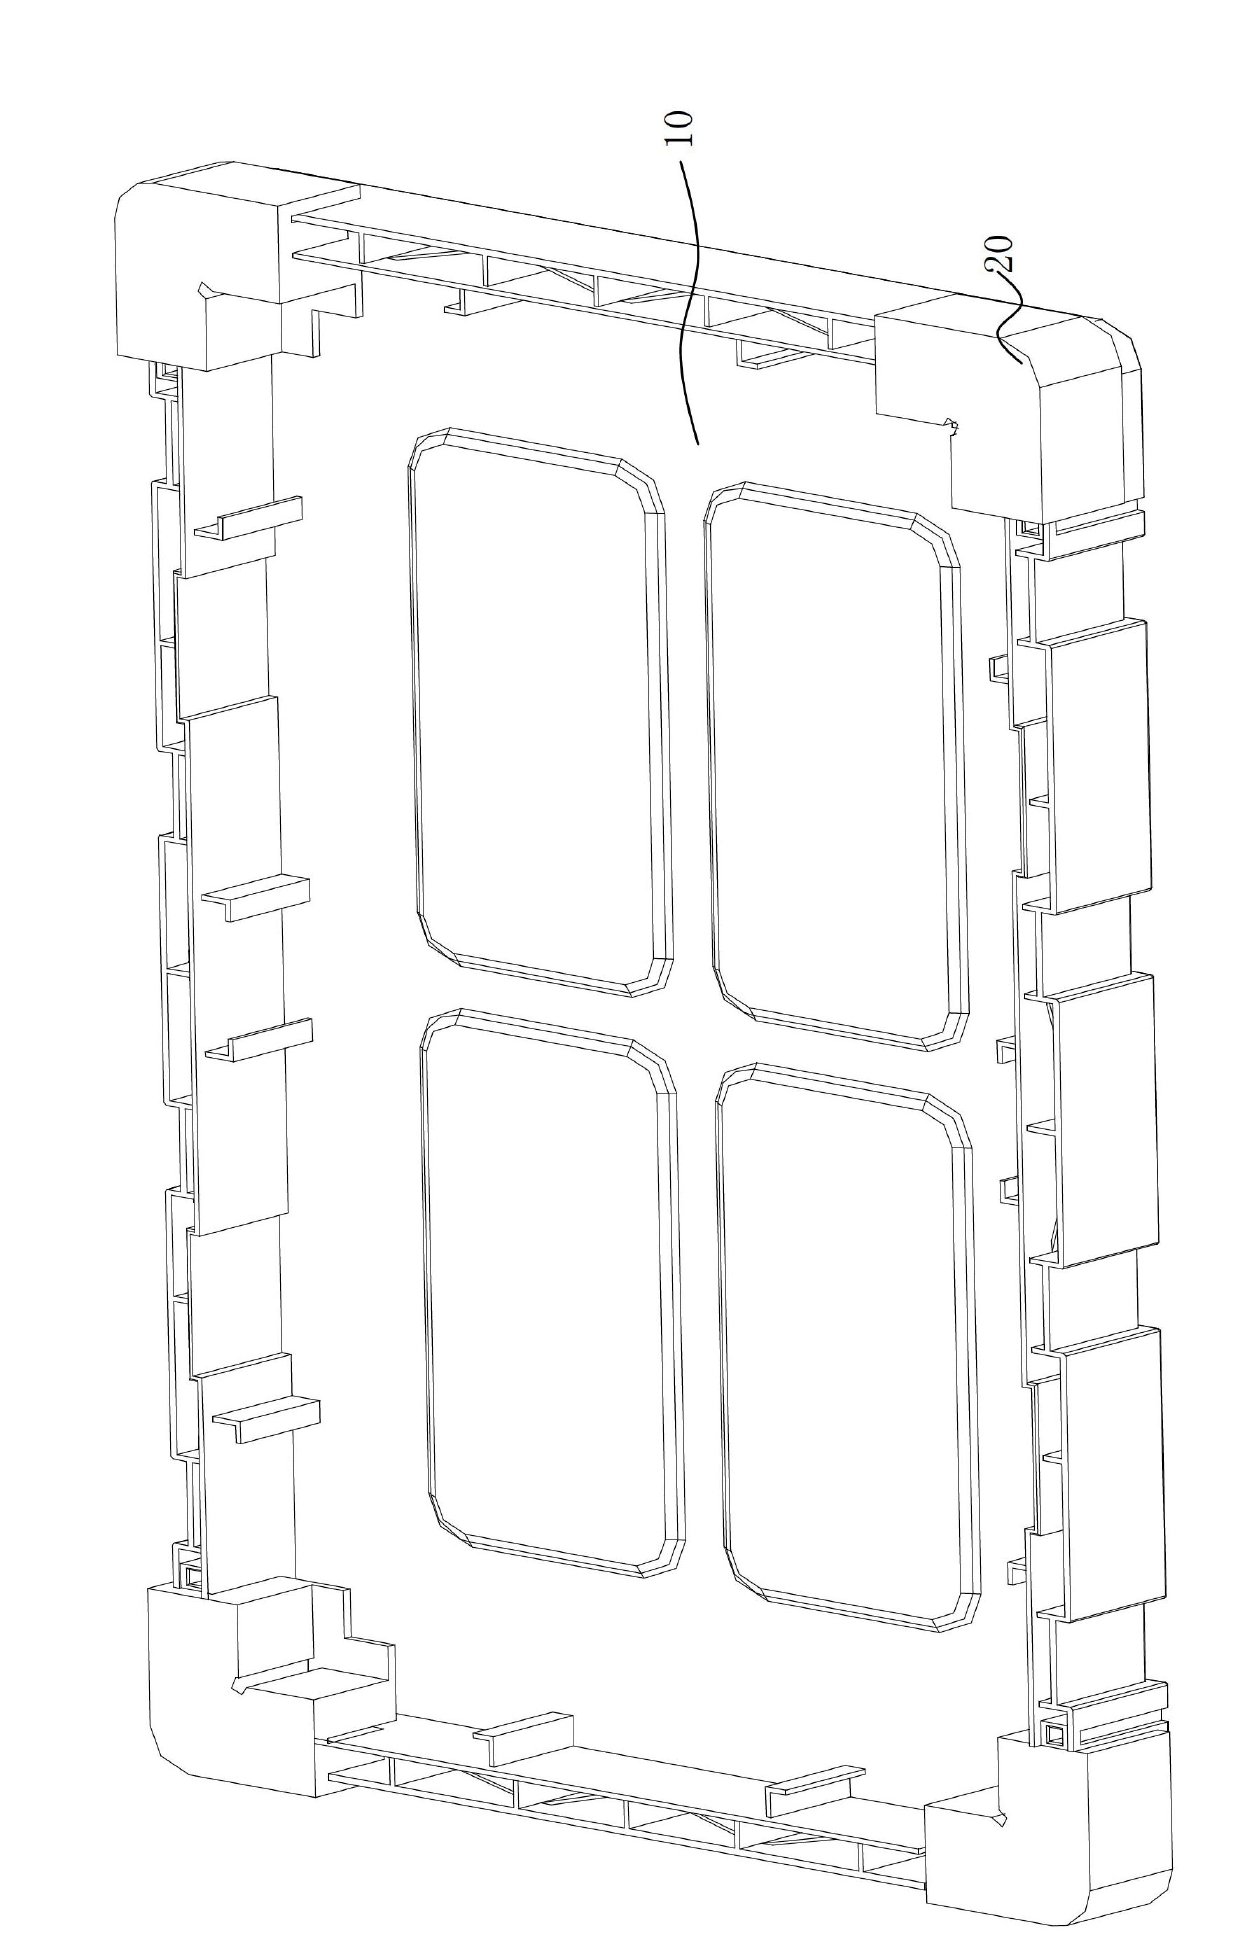 Buffer stop block structure and corresponding package box body